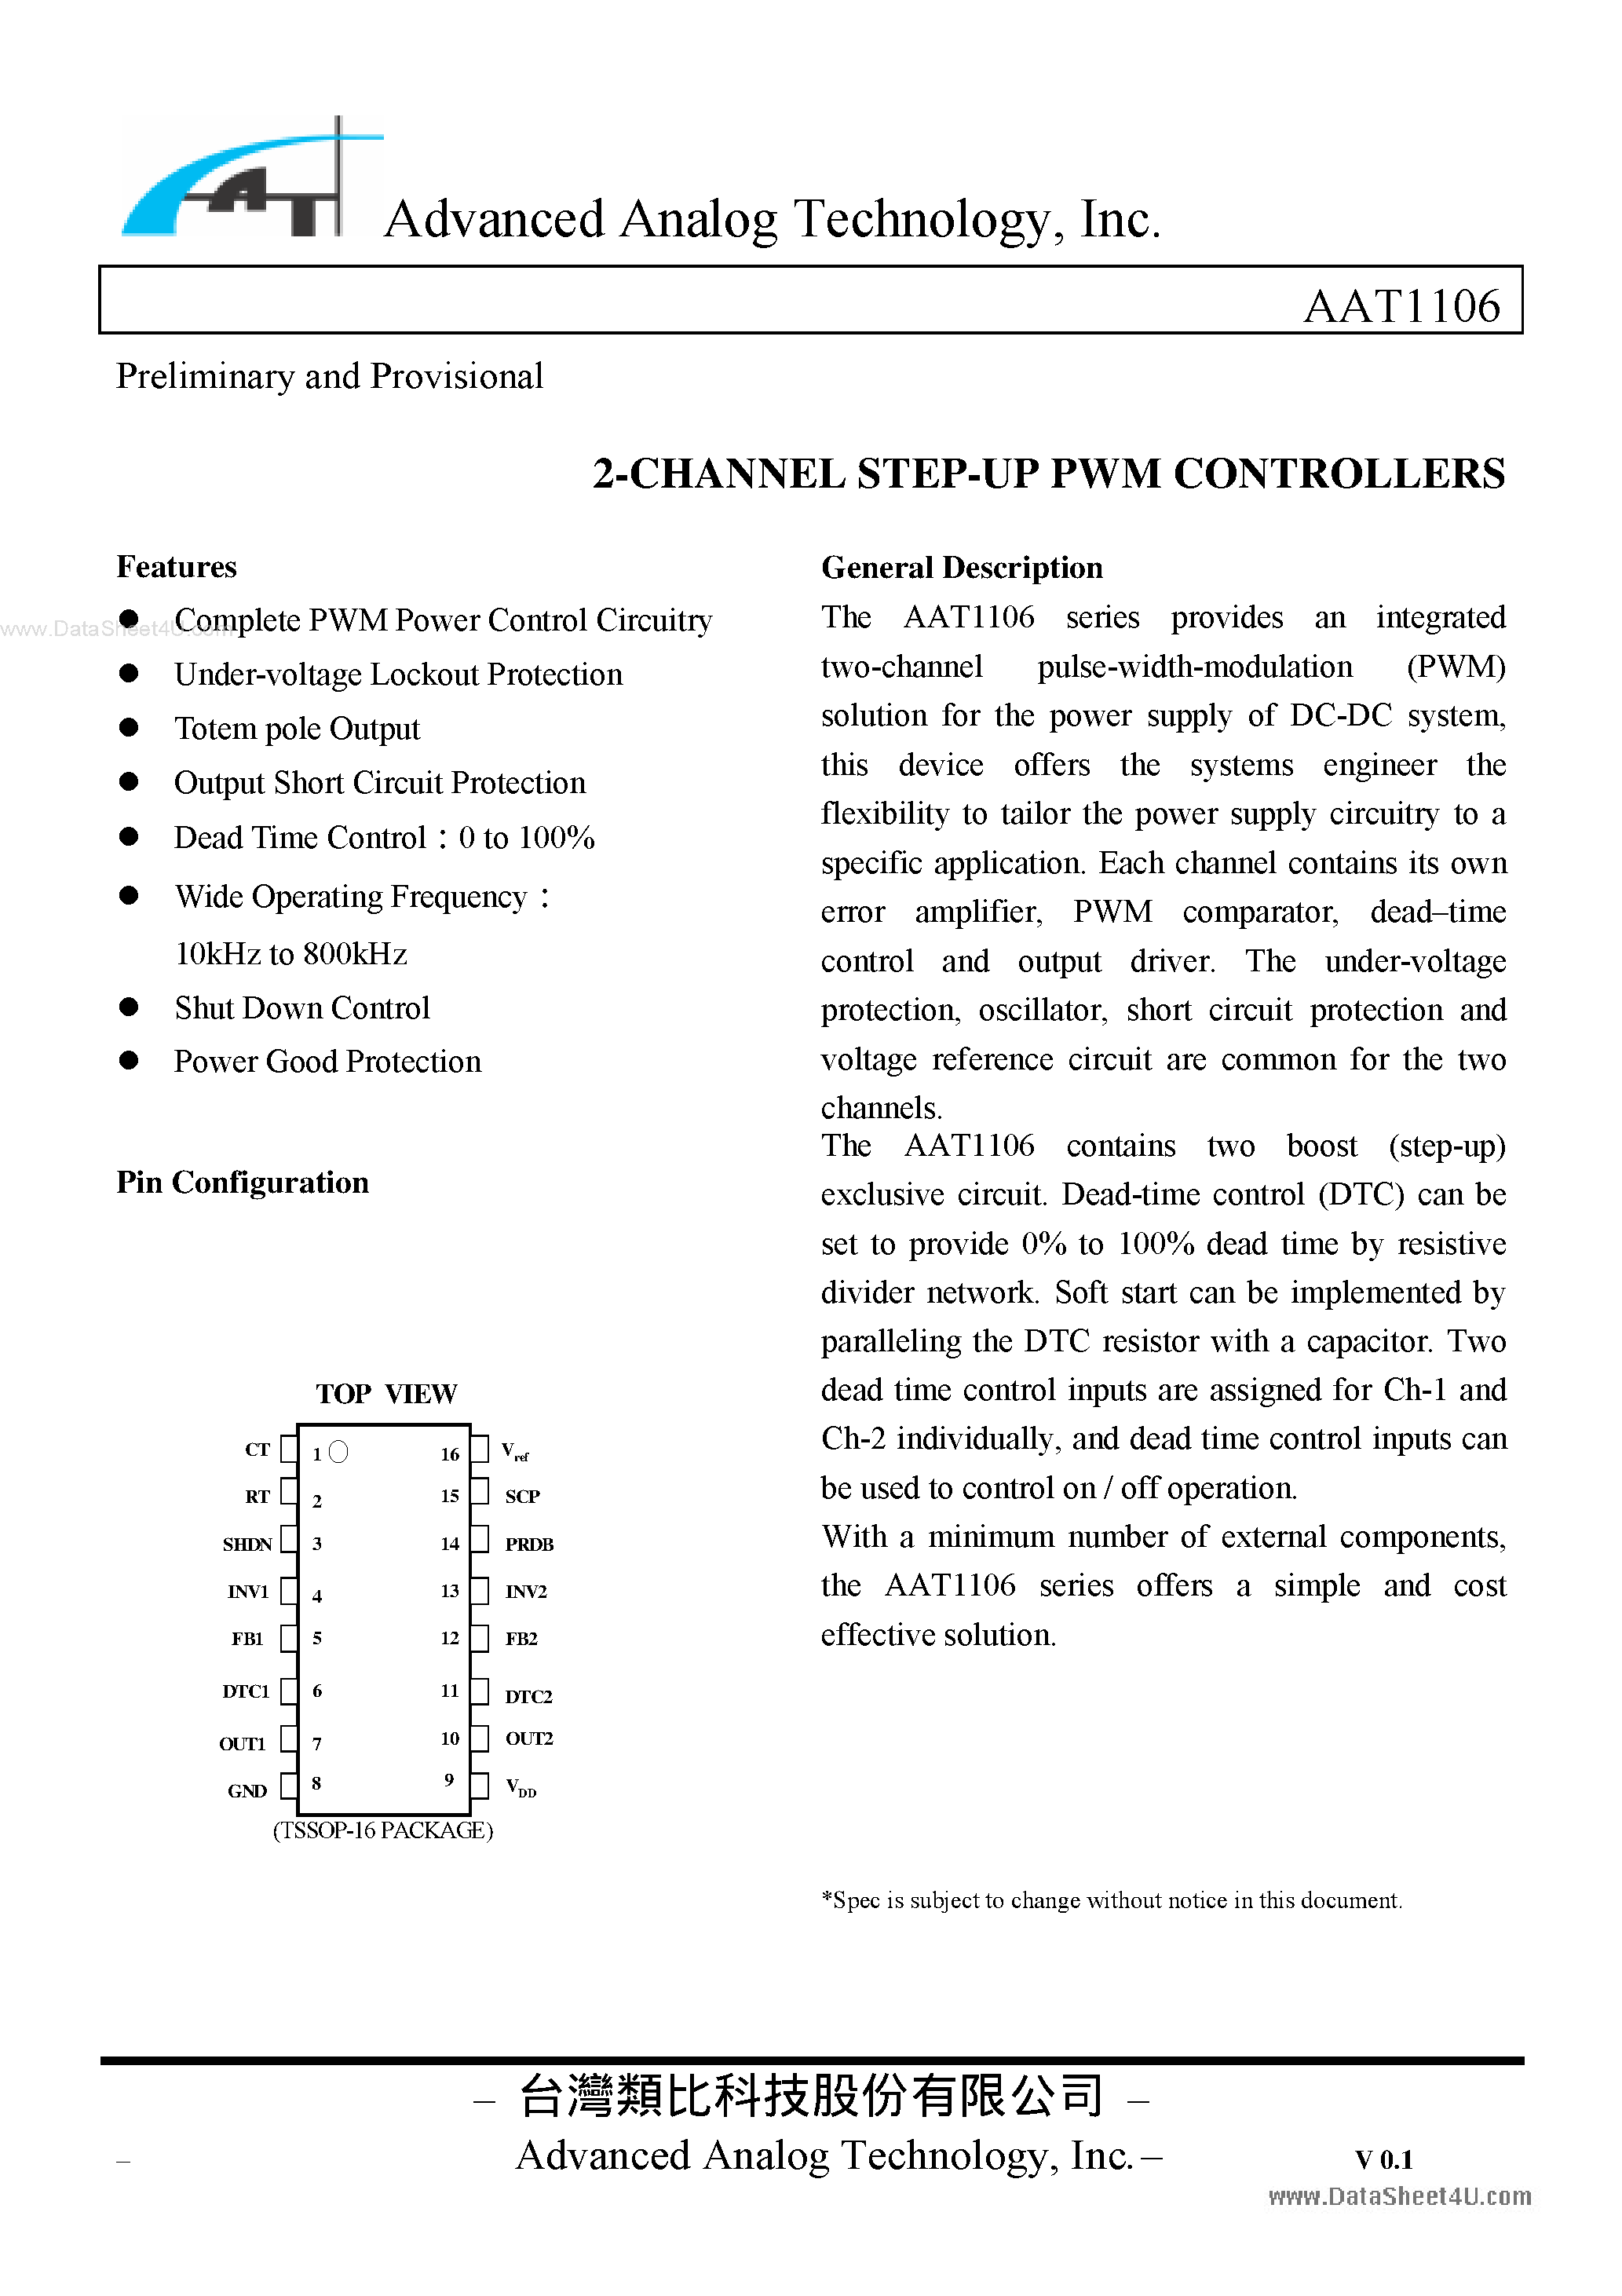 Datasheet AAT1106 - 2-CHANNEL STEP-UP PWM CONTROLLERS page 1